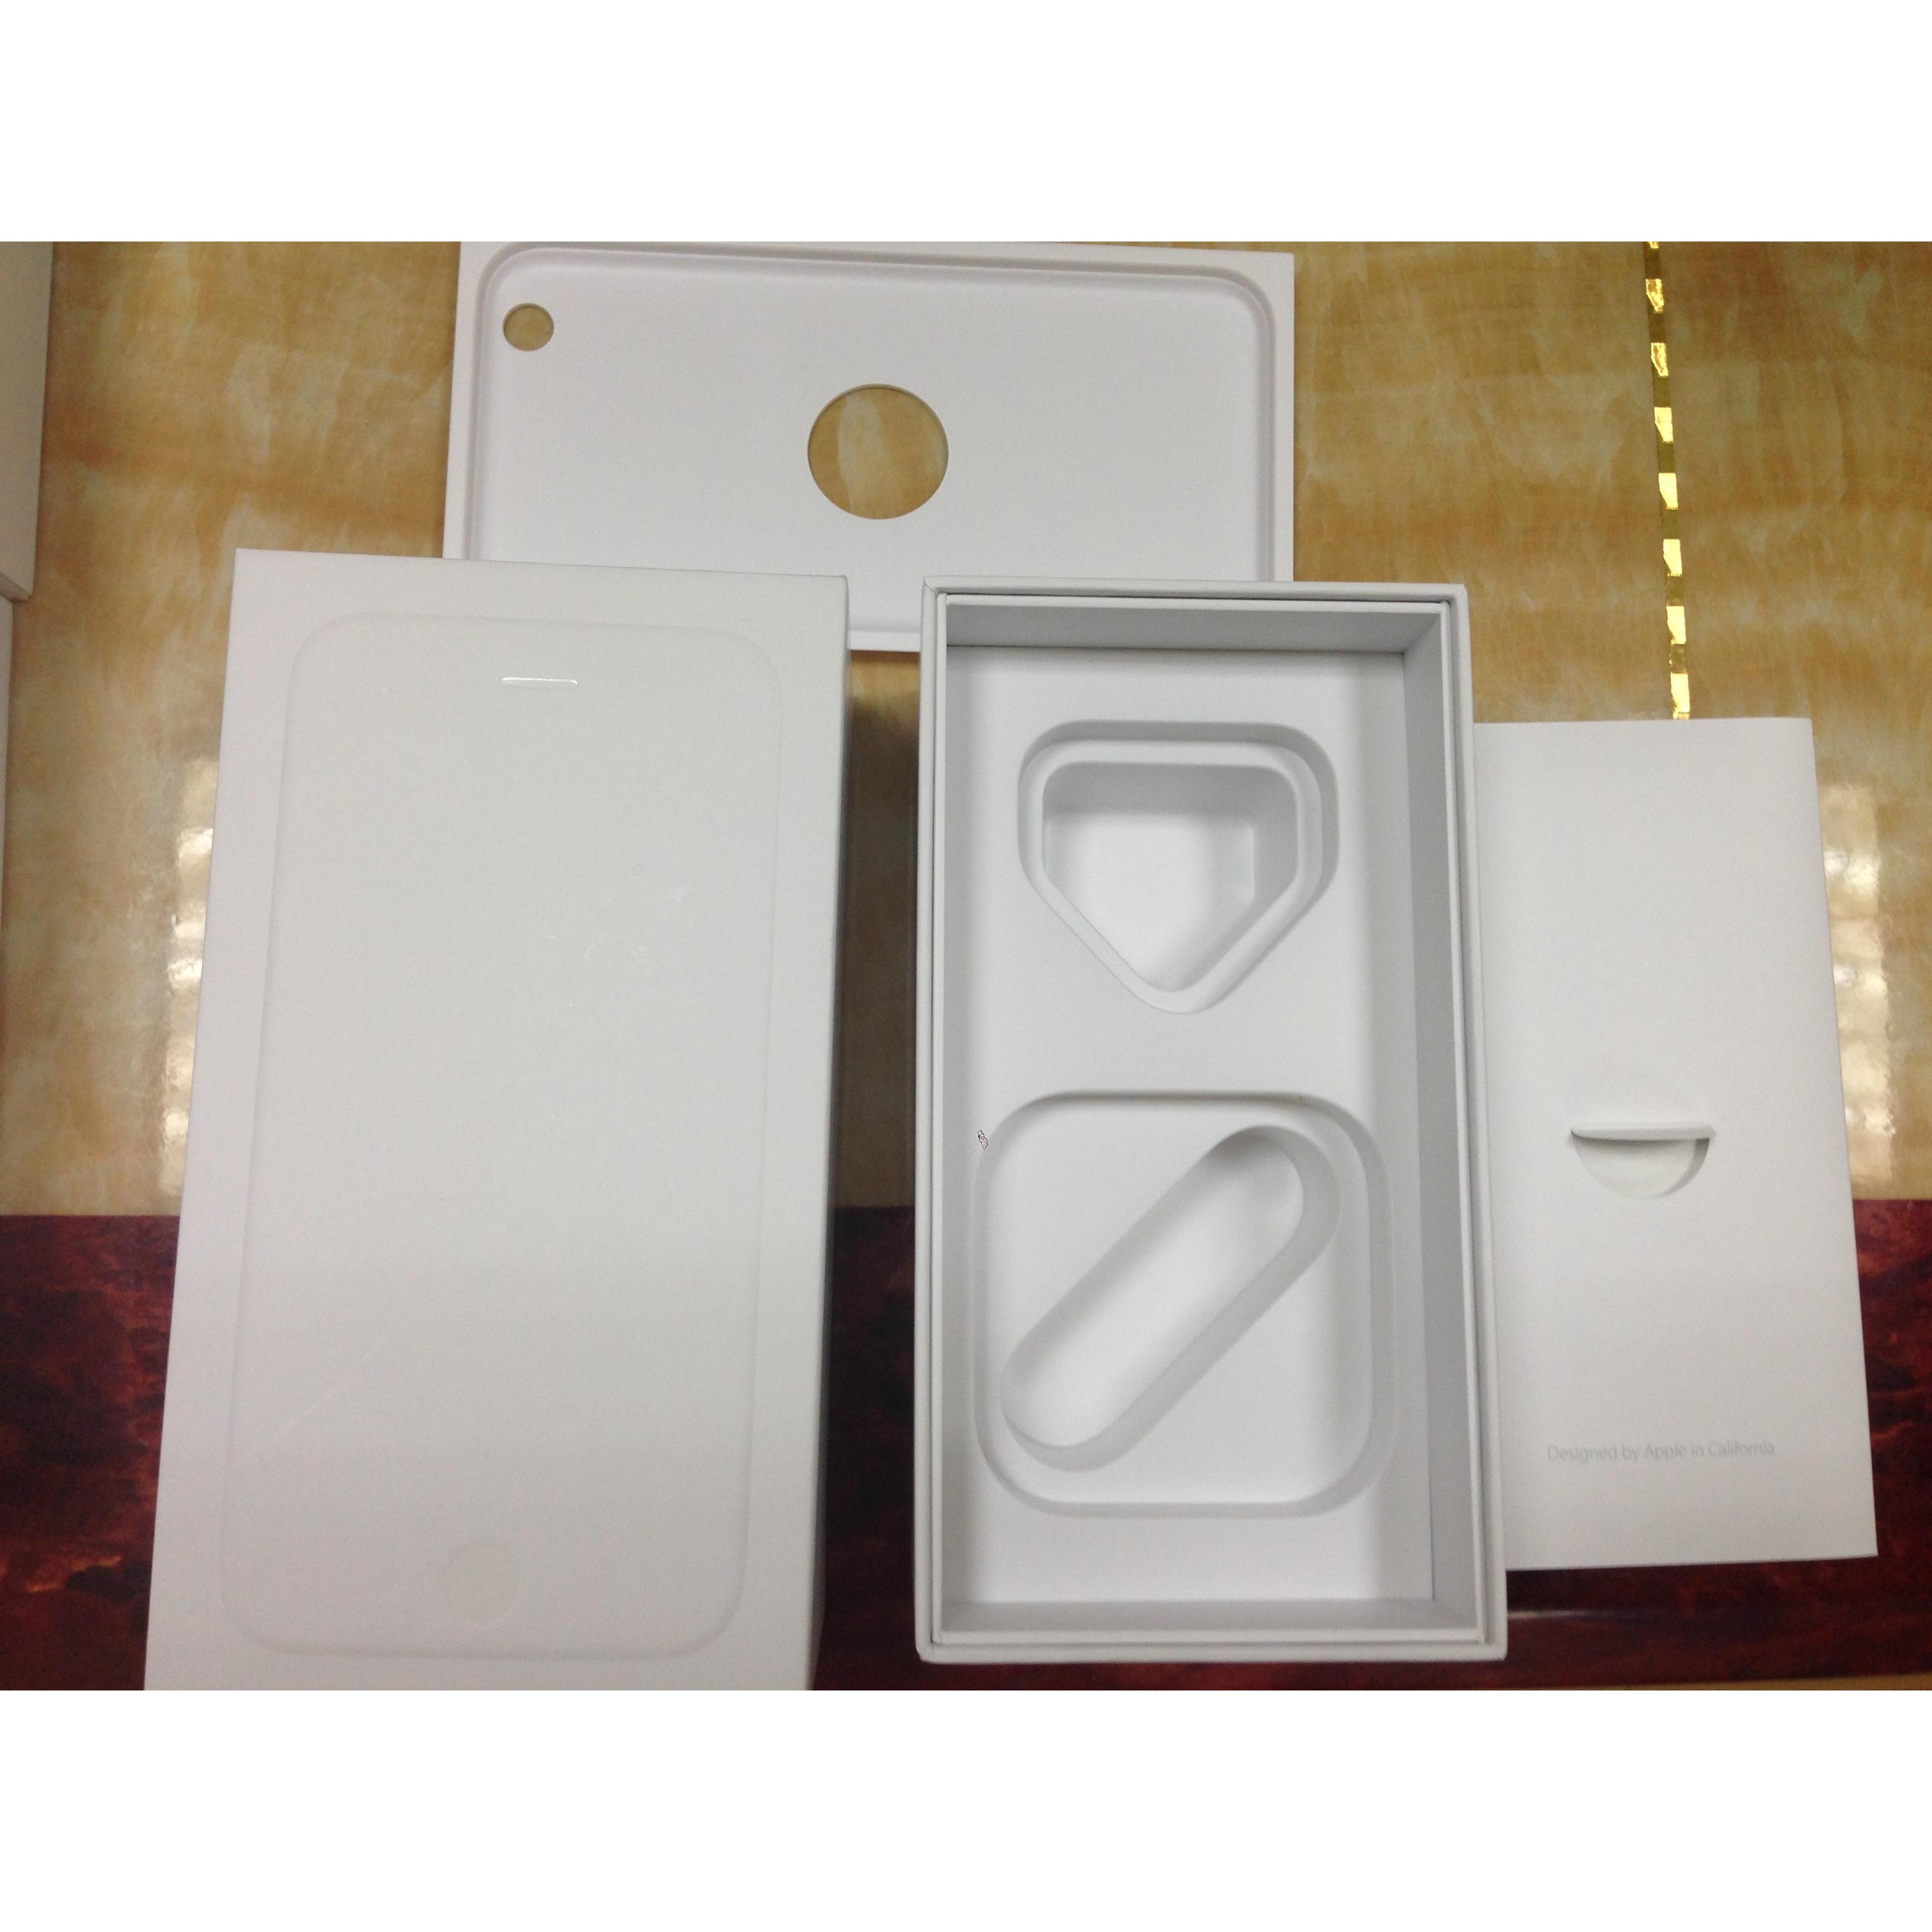 Apple iPhone 6 Box Wholesale Suppliers